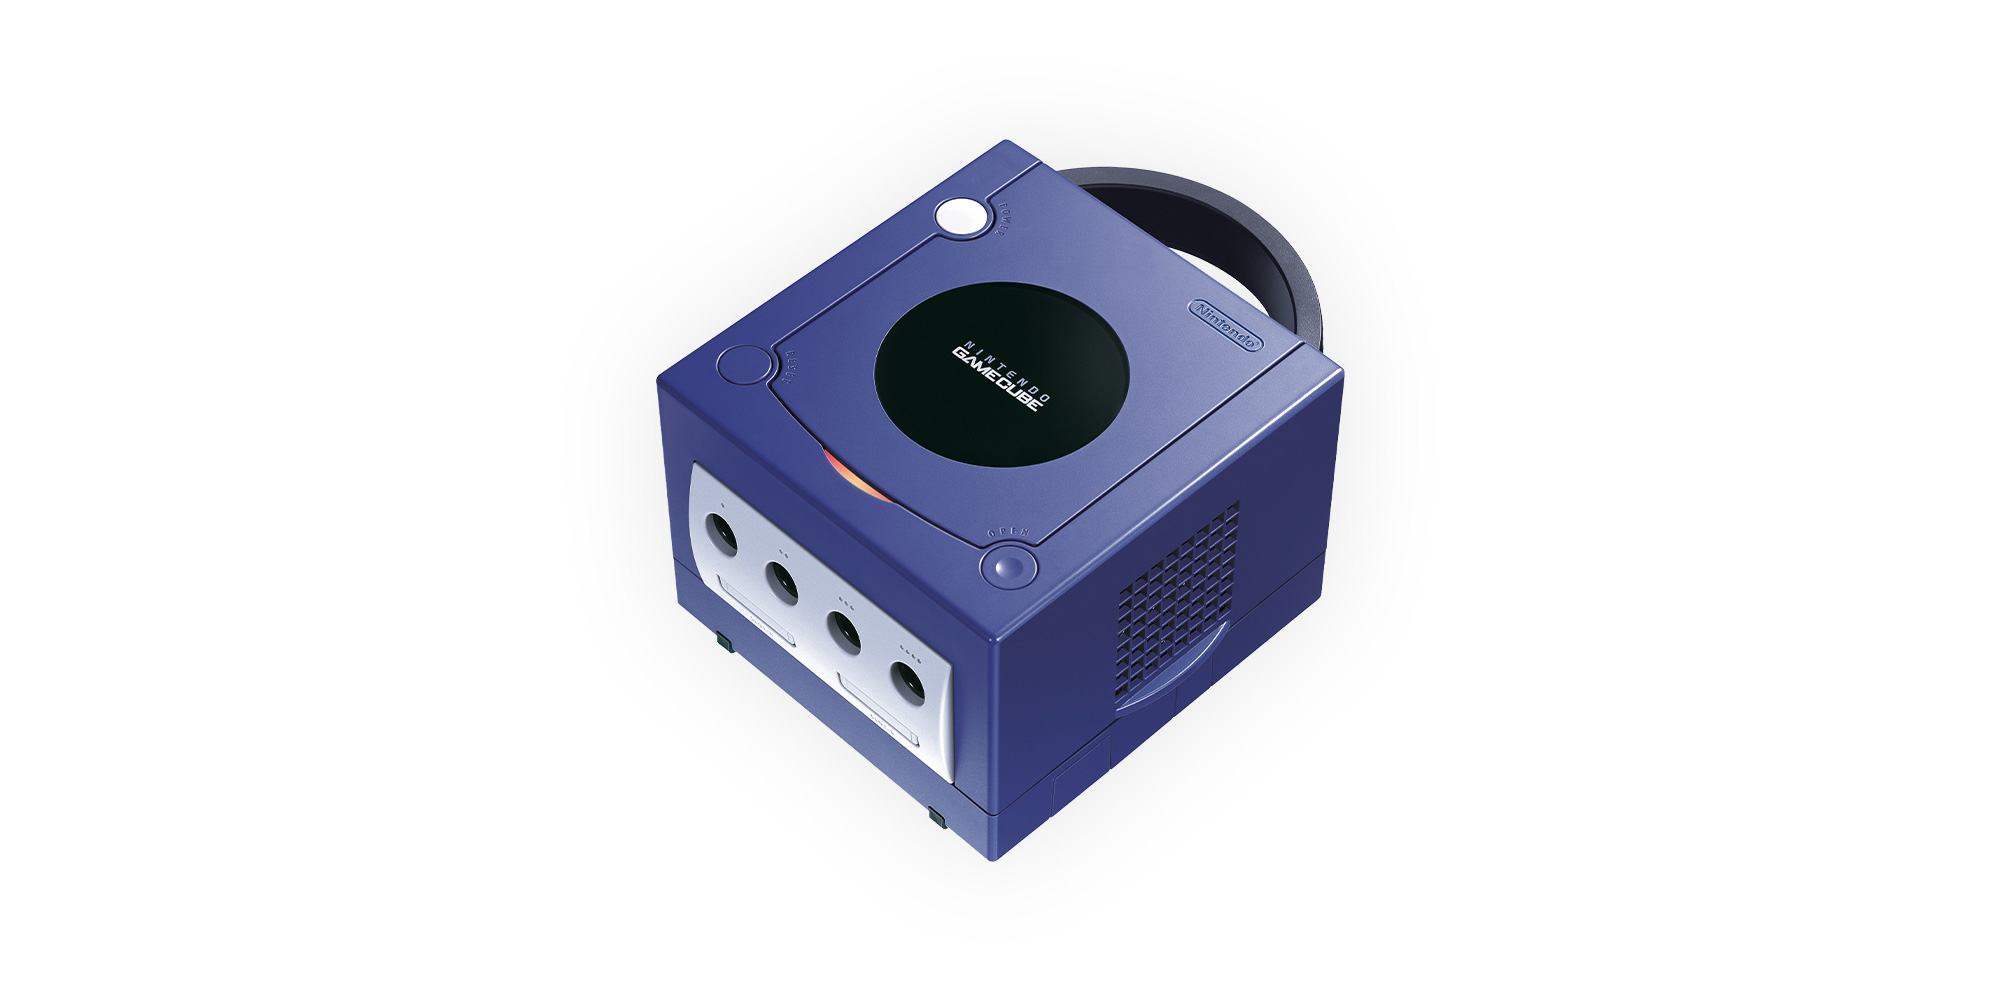 gamecube console only